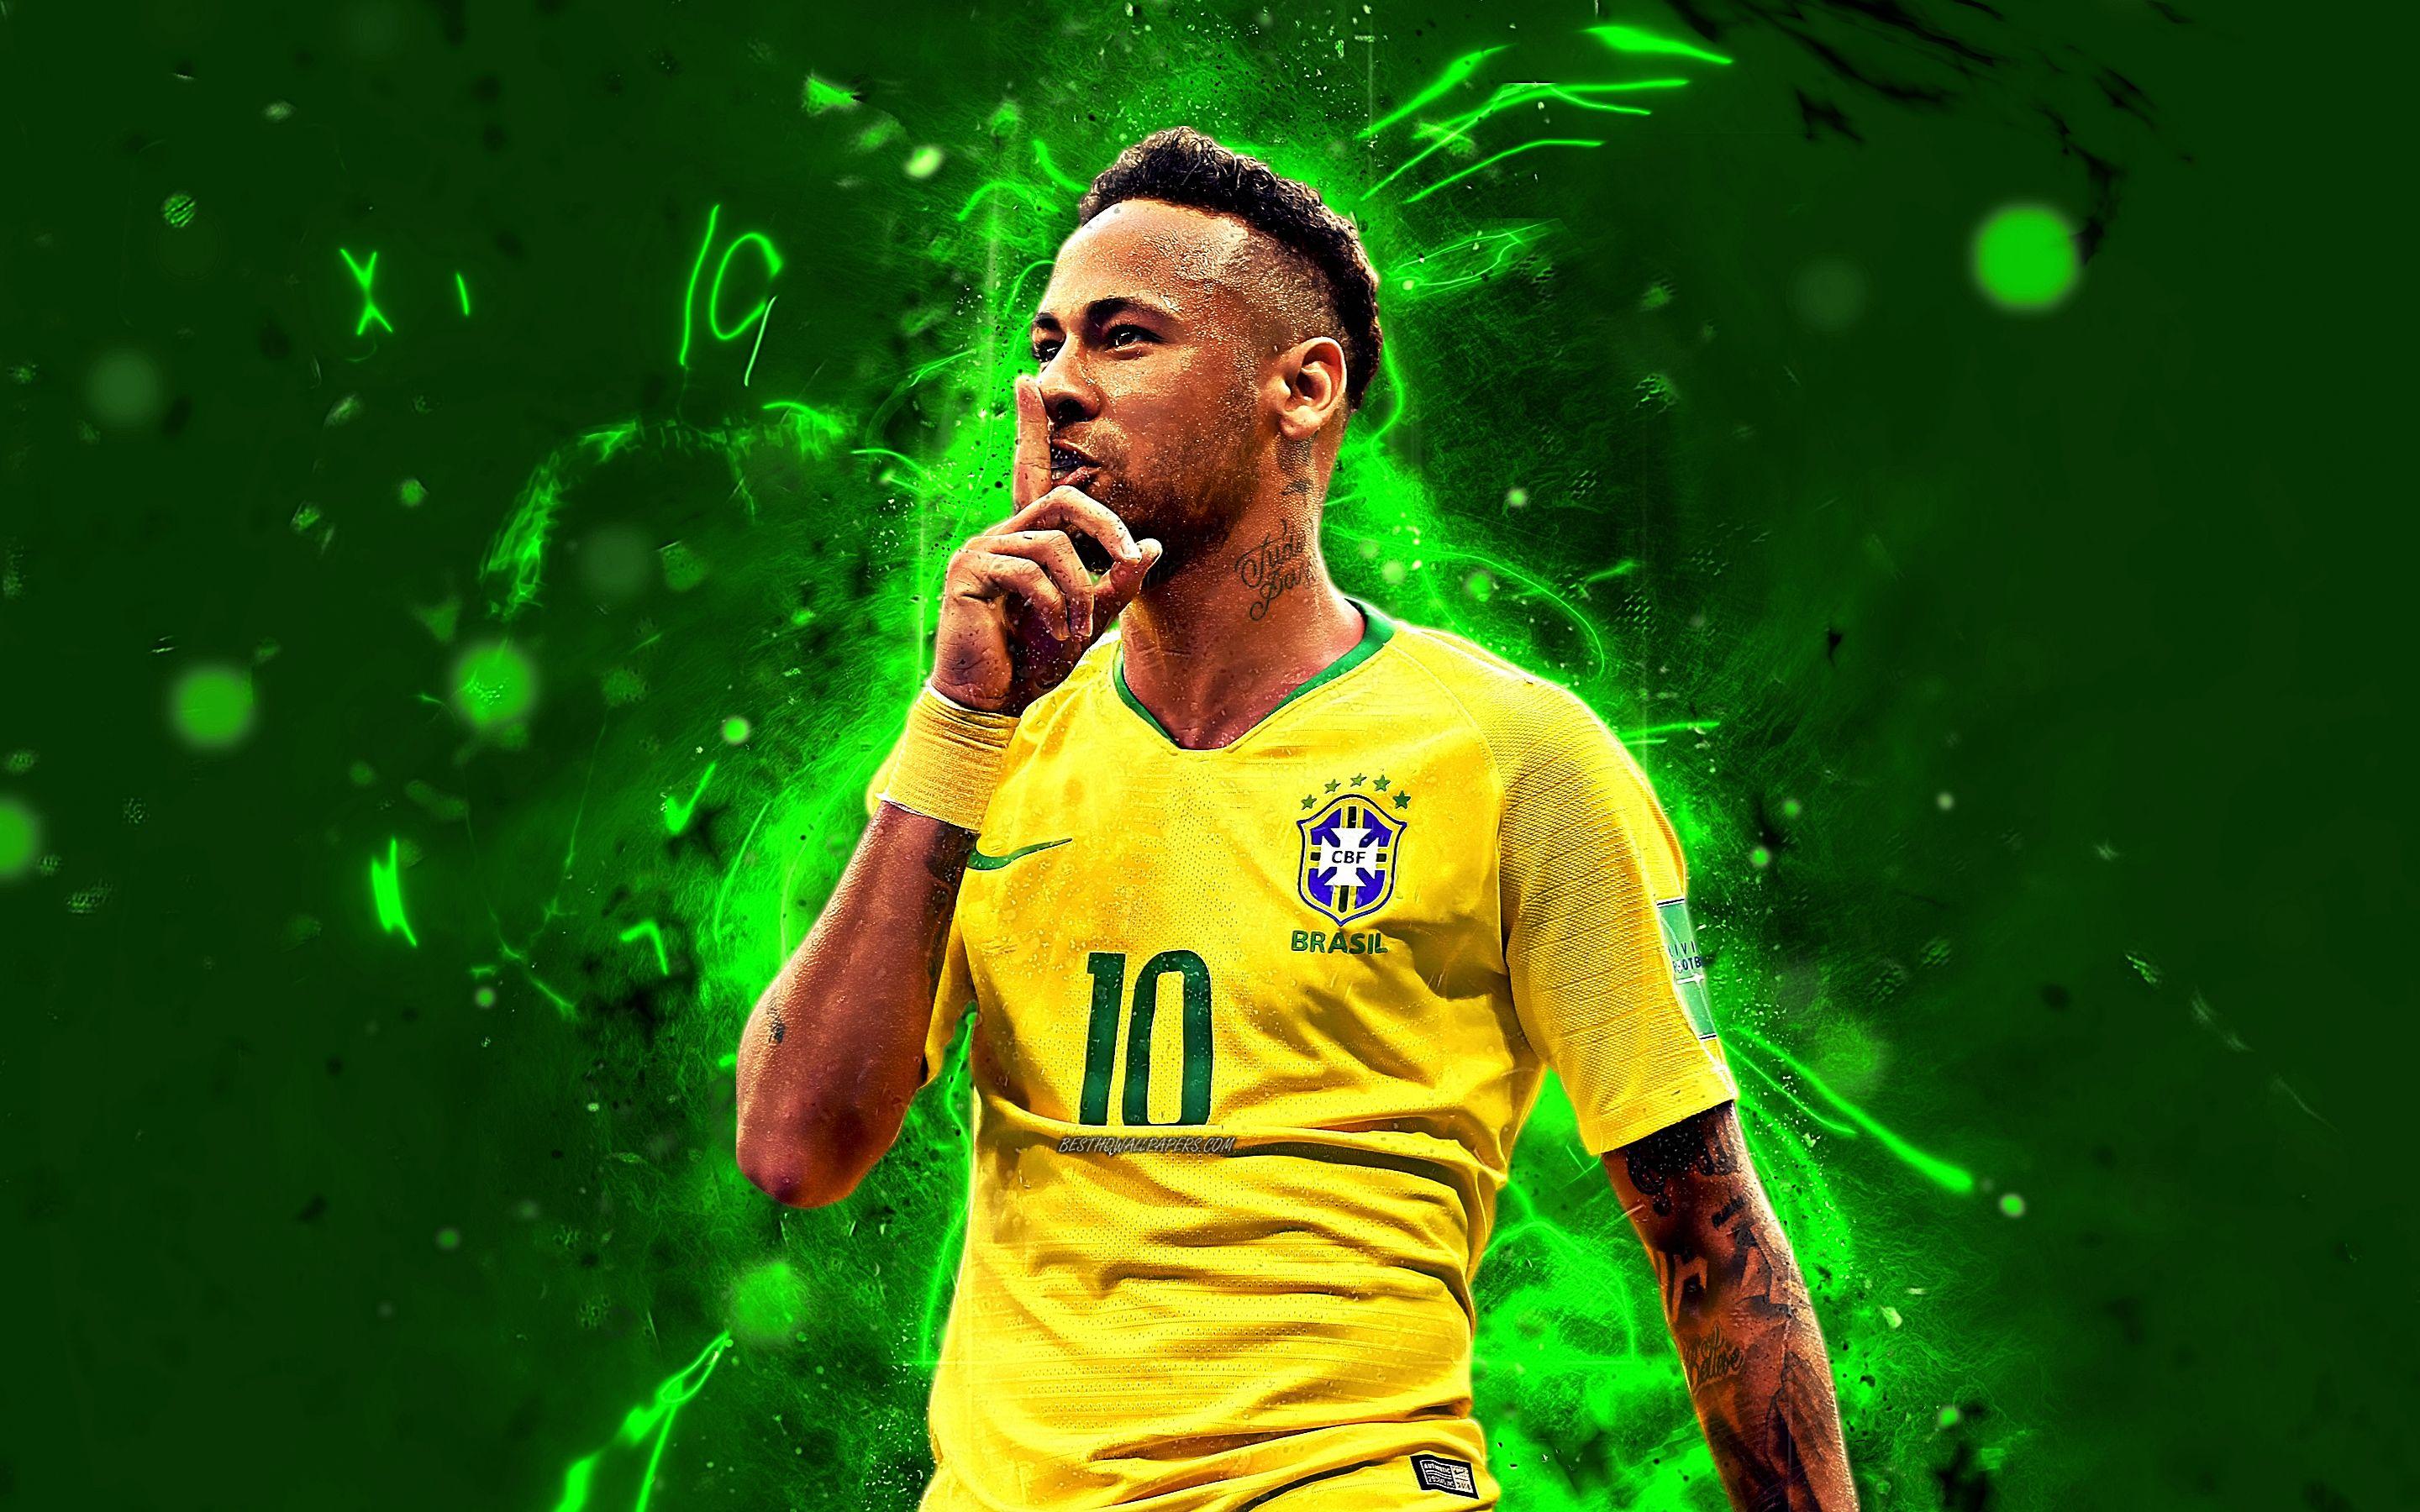 Brazil People Wallpapers - Top Free Brazil People Backgrounds ...